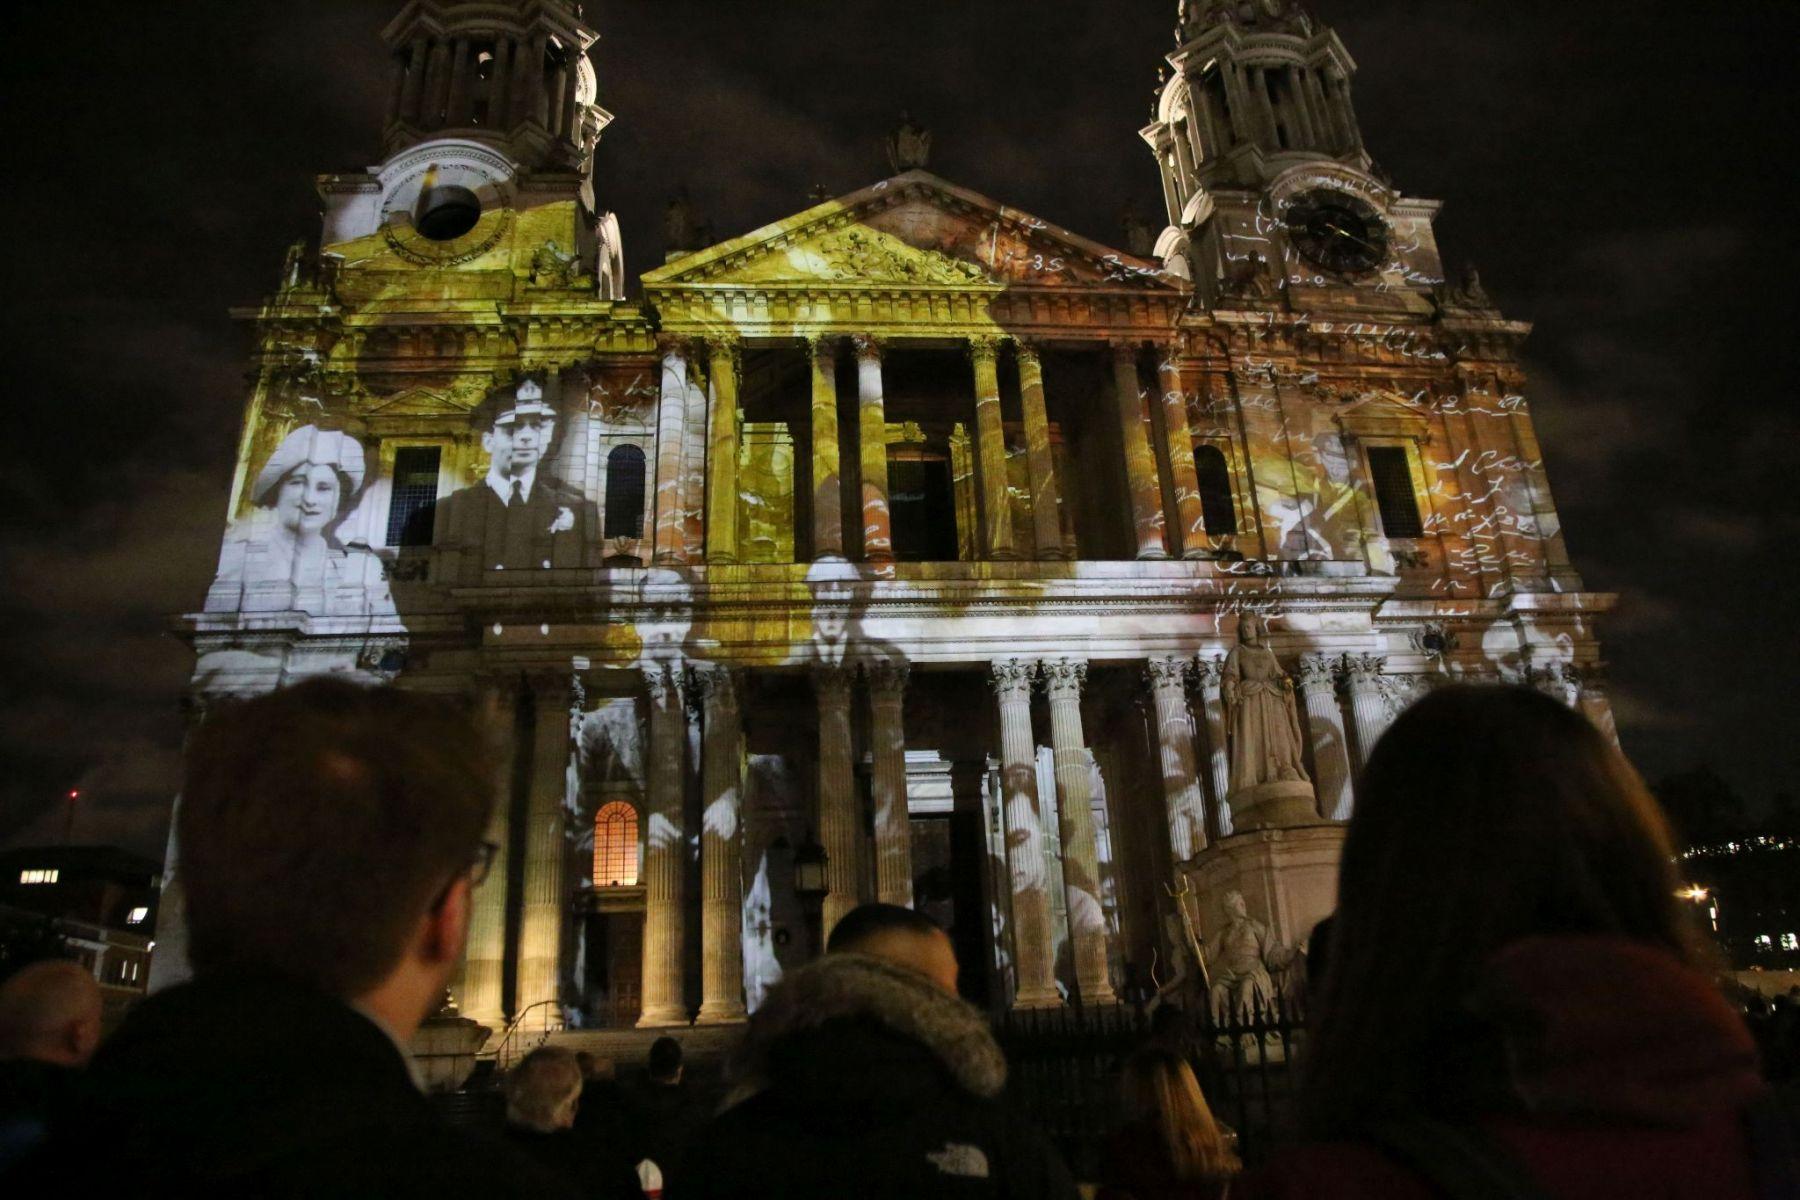 2019 St. Paul's Cathedral Illuminated with projected photos to remember the work of the St. Paul’s Fire Watch who protected the cathedral through the bombing and fires of The Blitz in World War Two